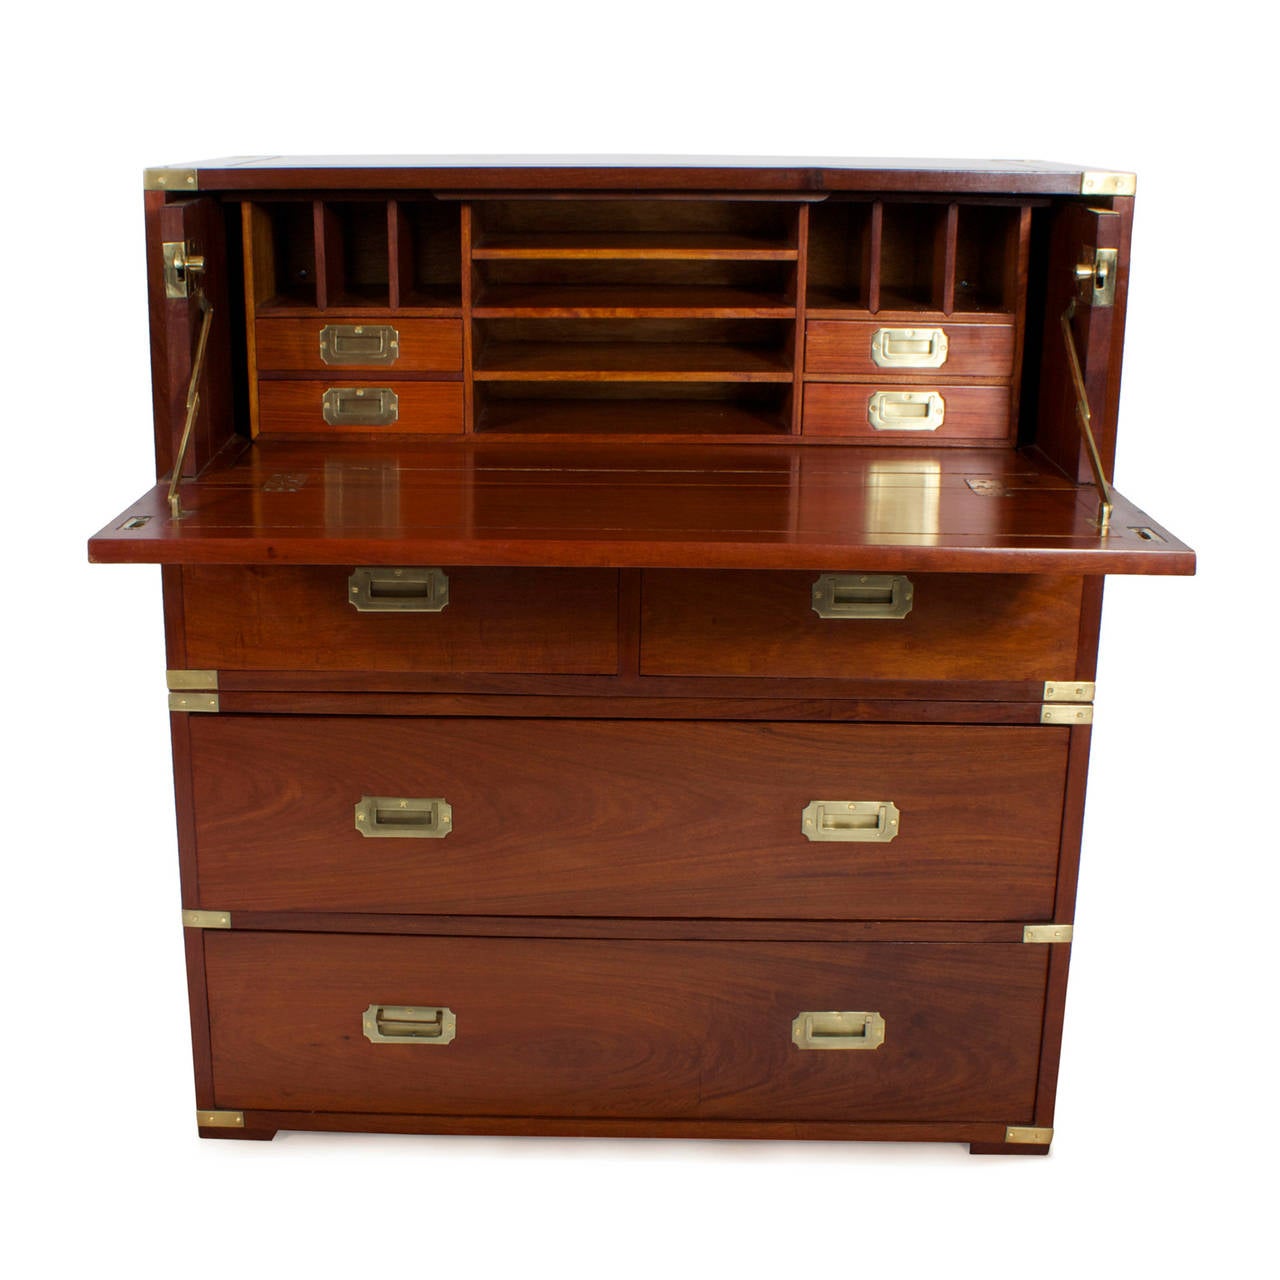 Hong Kong Modern Take on a Campaign Style Secretary Chest